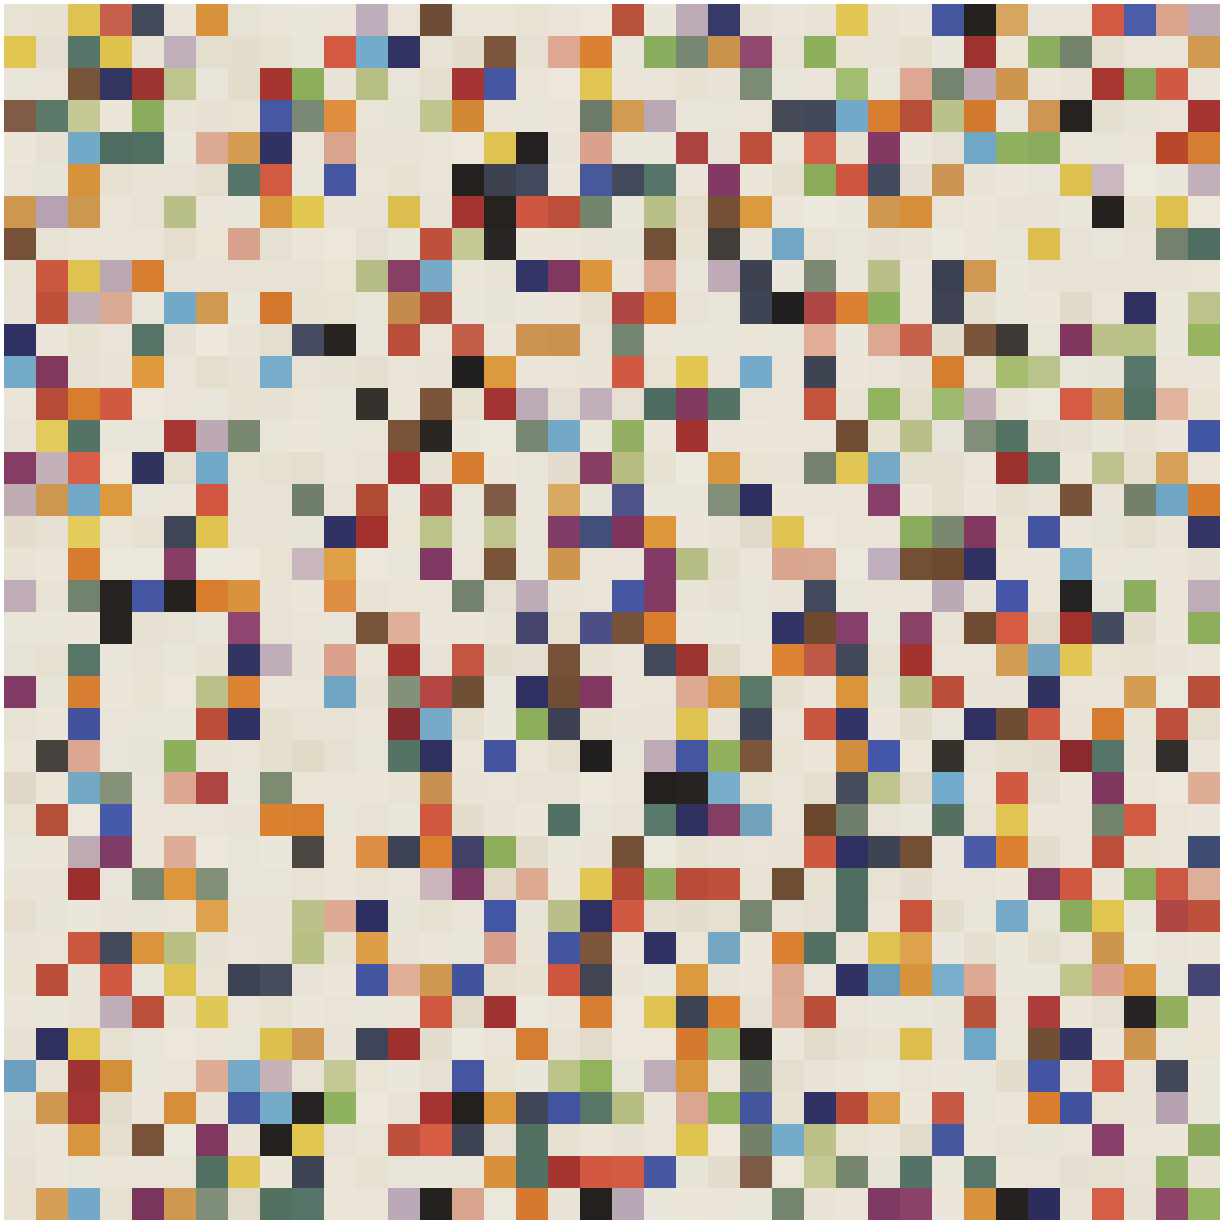 Spectrum Colors Arranged by Chance, after Ellsworth Kelly